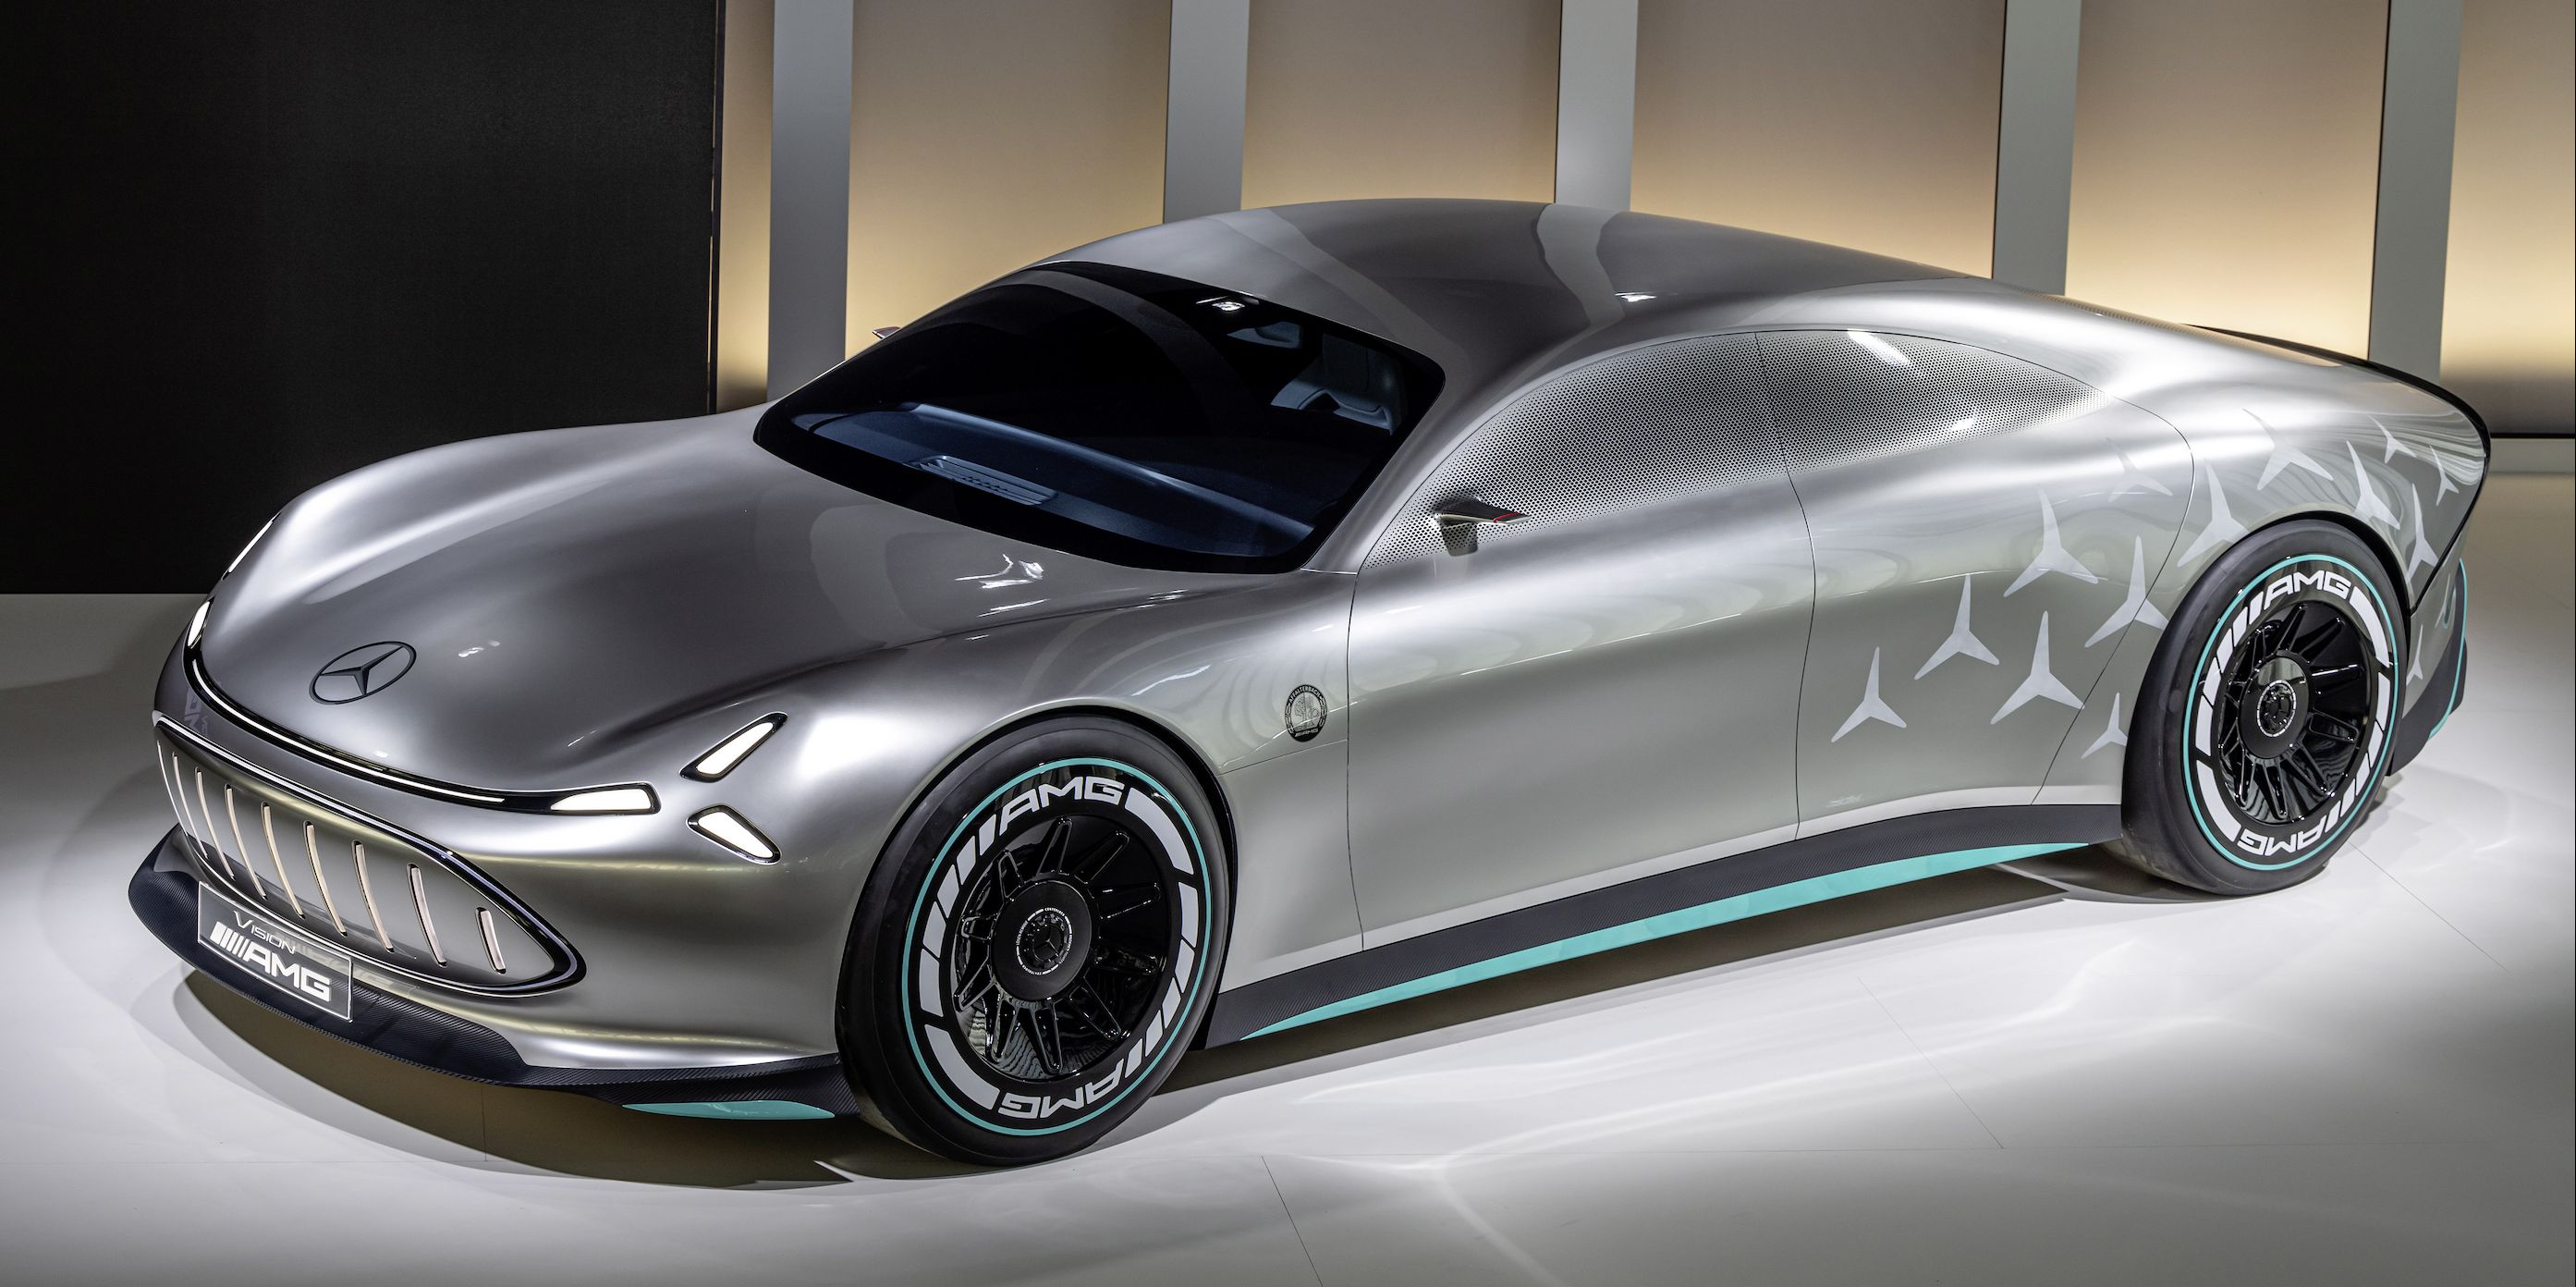 Mercedes Vision AMG Concept Is a Look at the Company's Performance Future